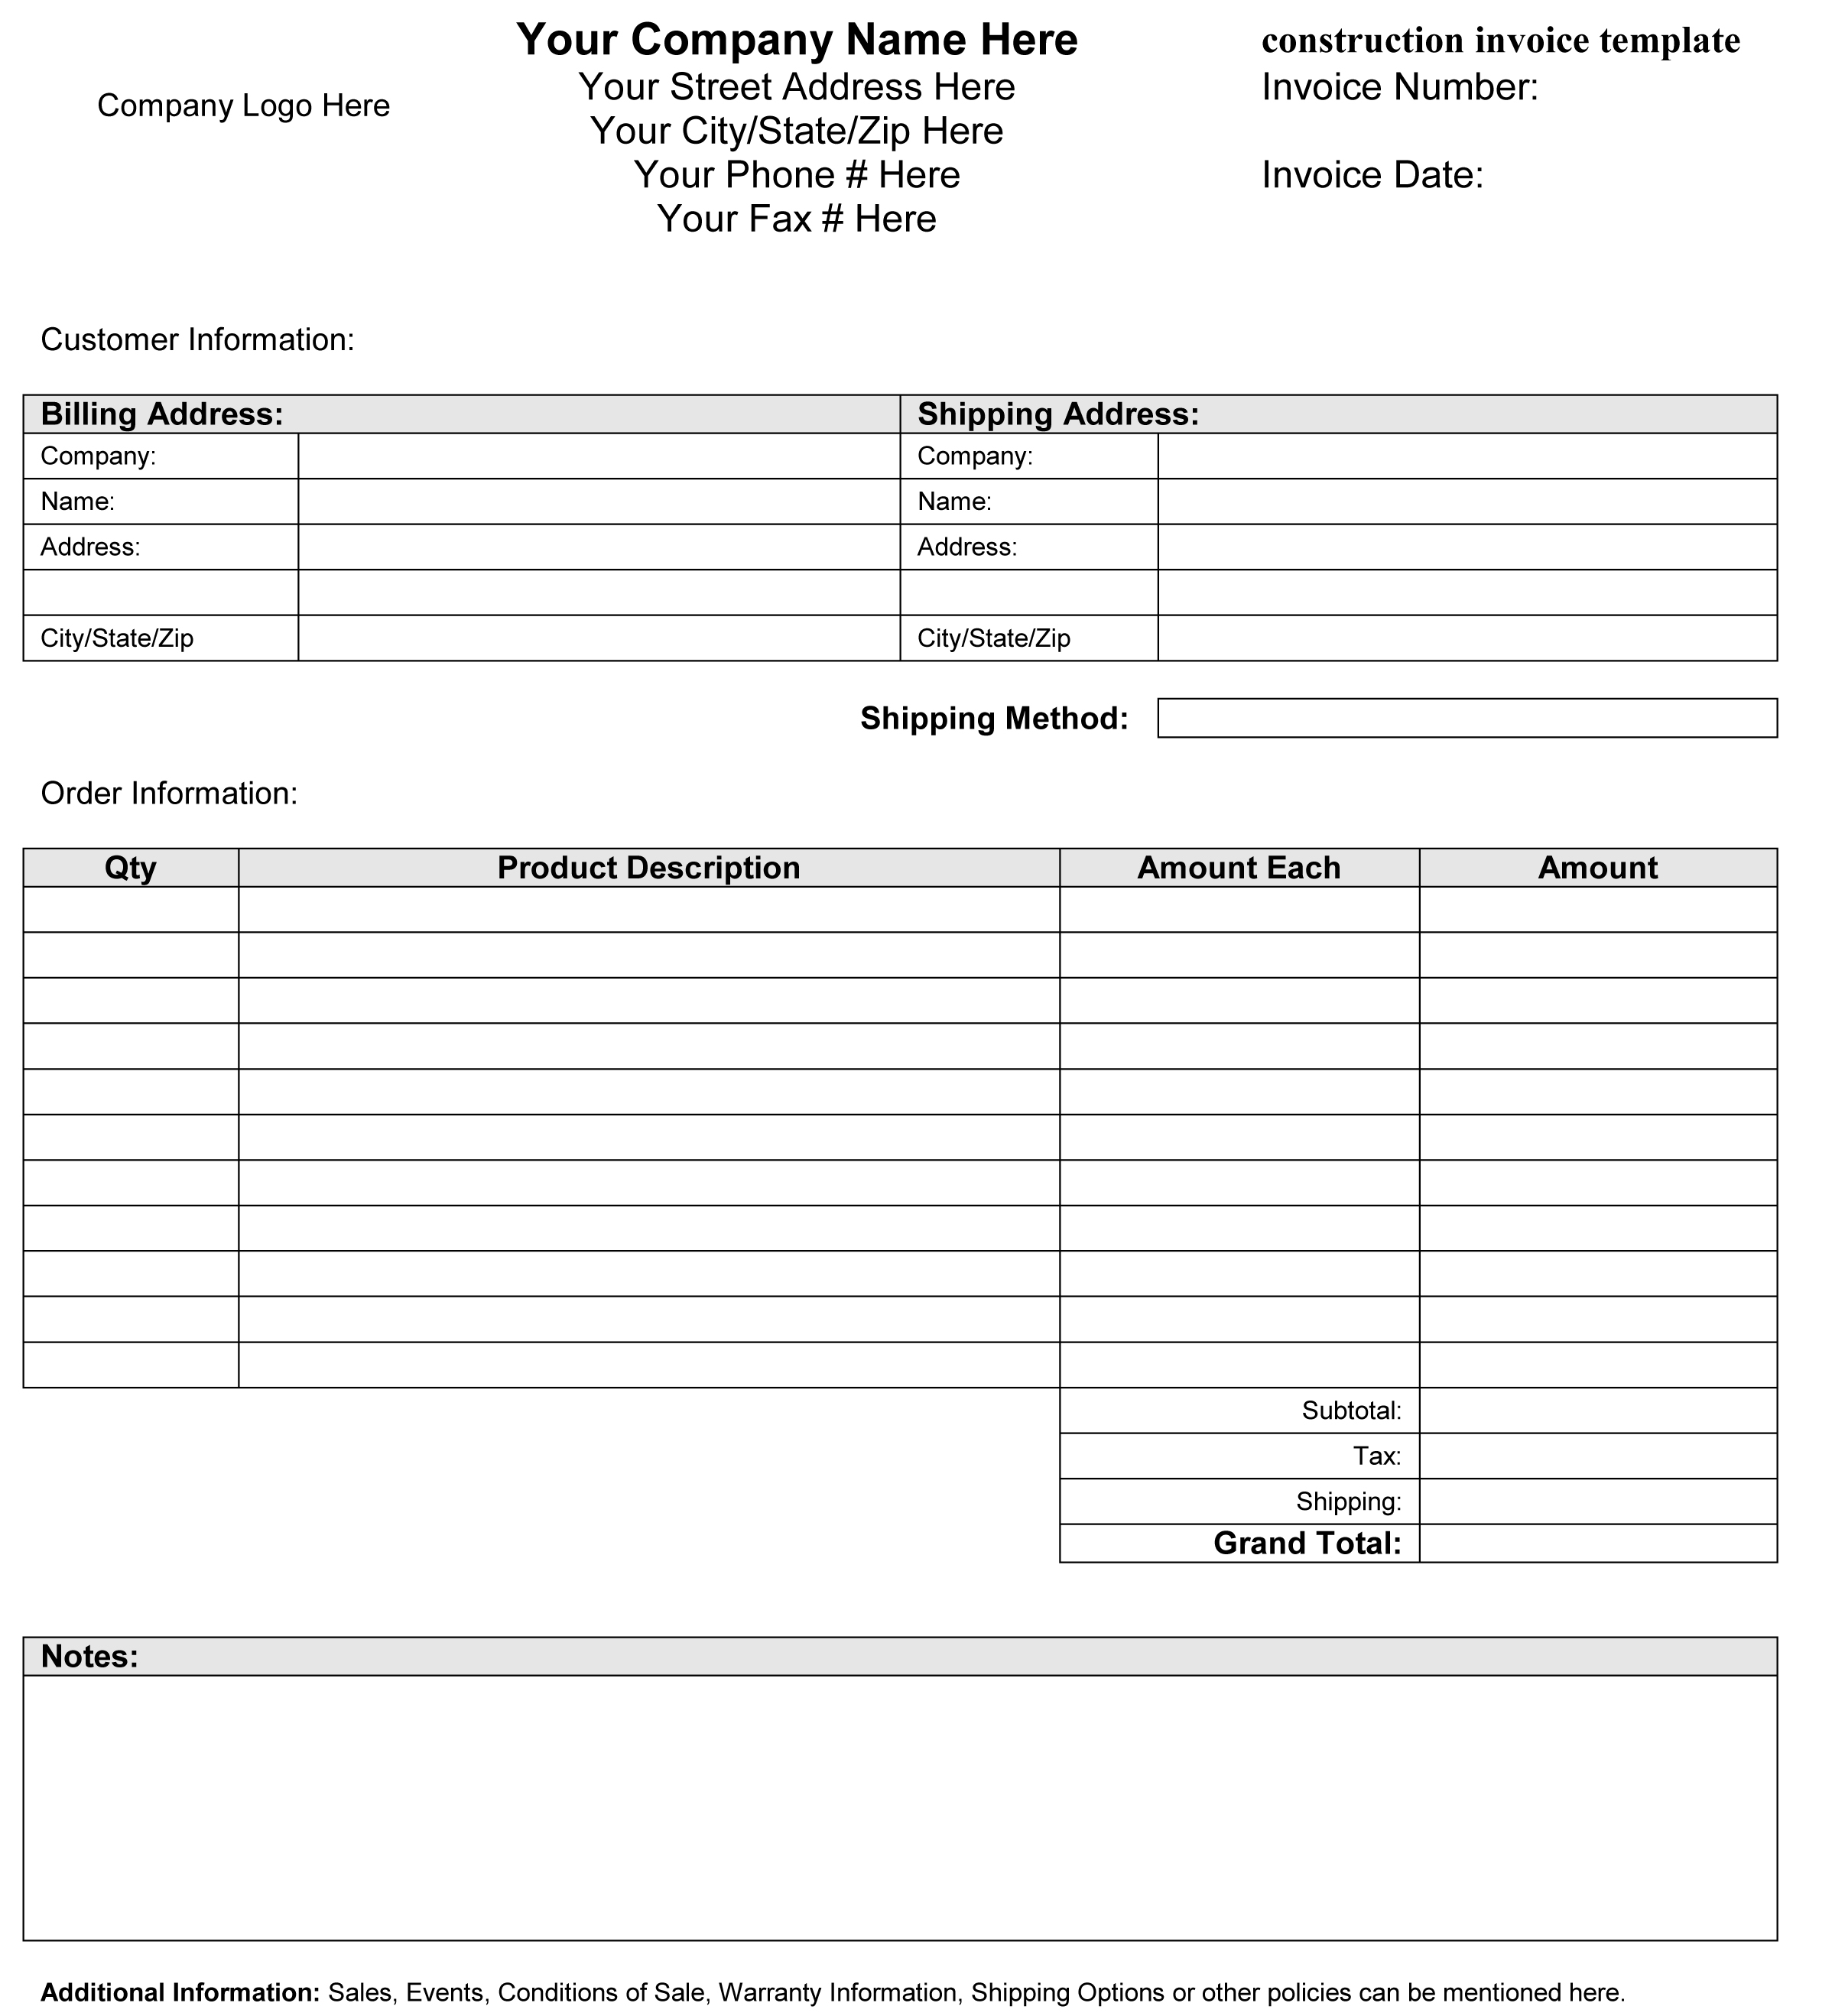 Construction Invoice Template Free Download Independent Contractor 